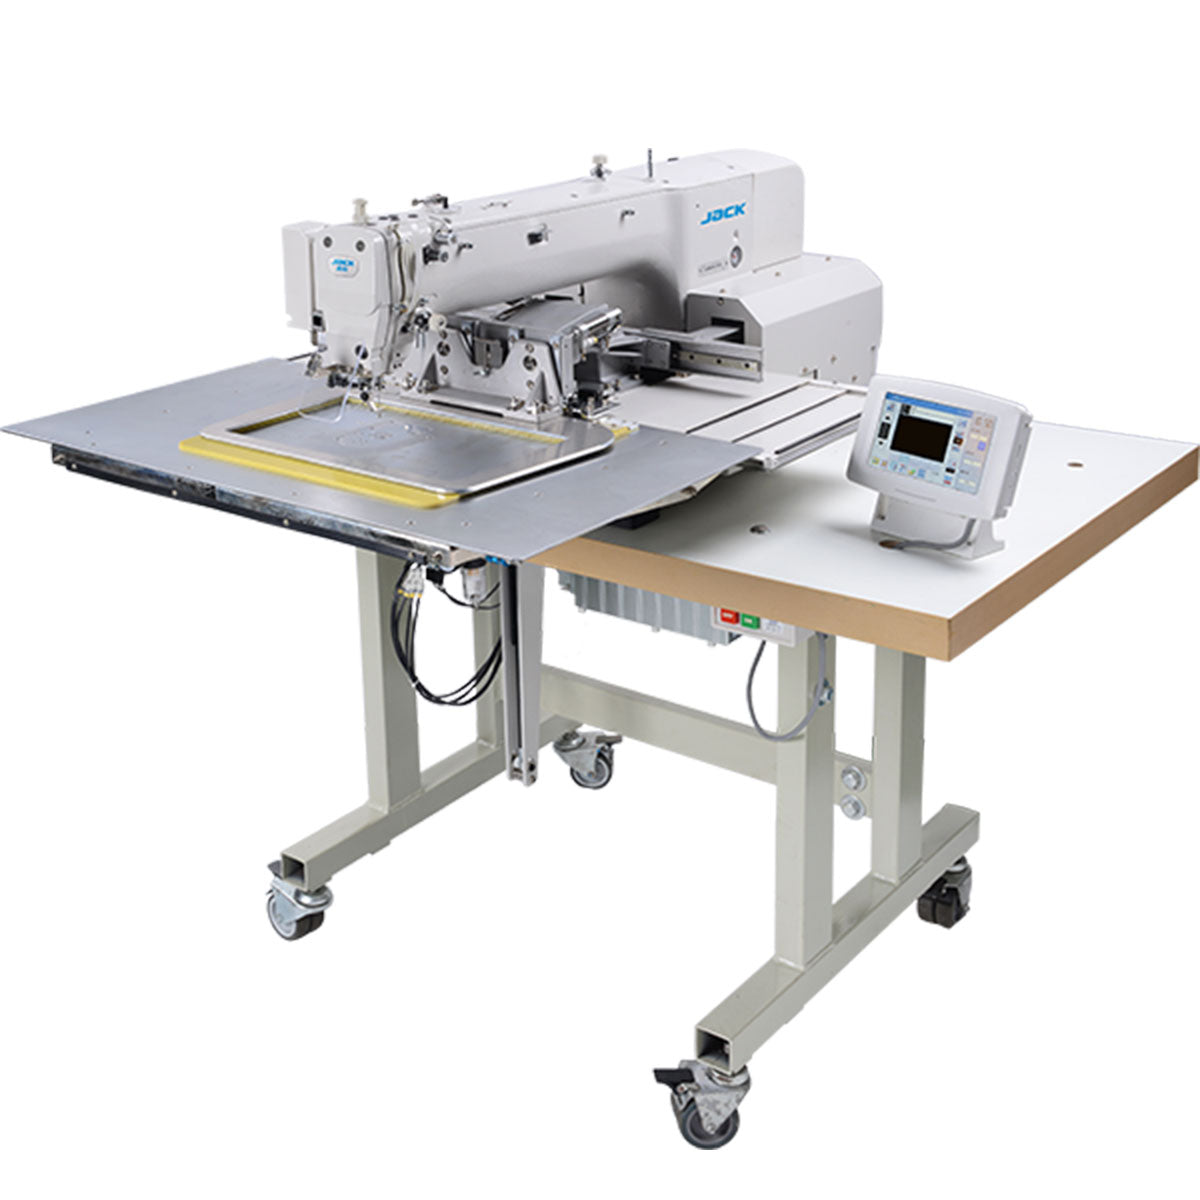 JACK JK-T3020-DII High-Speed Industrial Sewing Machine with CTP Sensor Assembled with Table and Stand Included